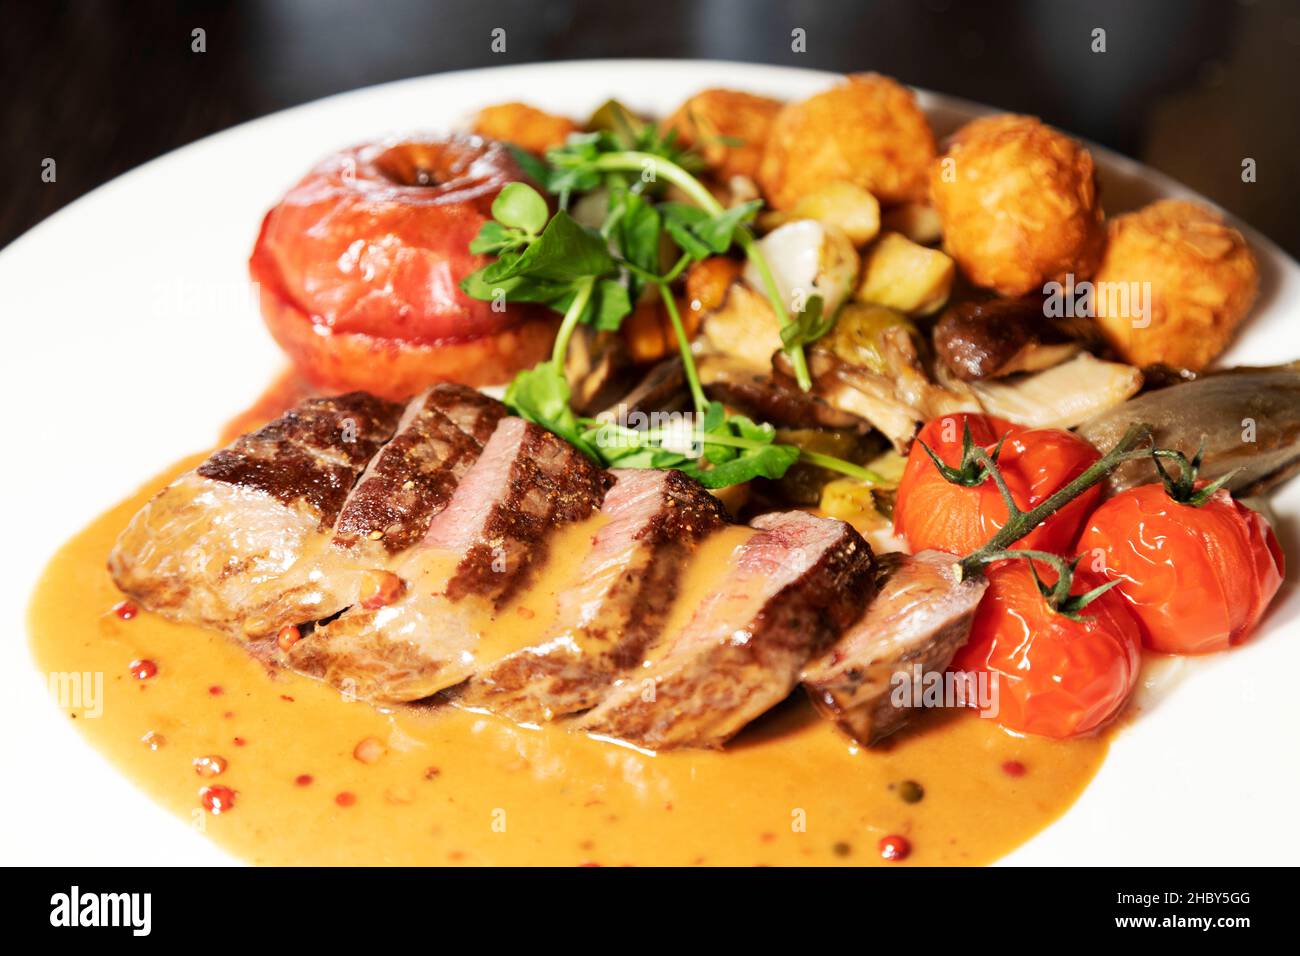 Roast wild boar served with gravy, baked apple, grilled tomatoes, seasonal greens and almond crusted potato balls. Stock Photo